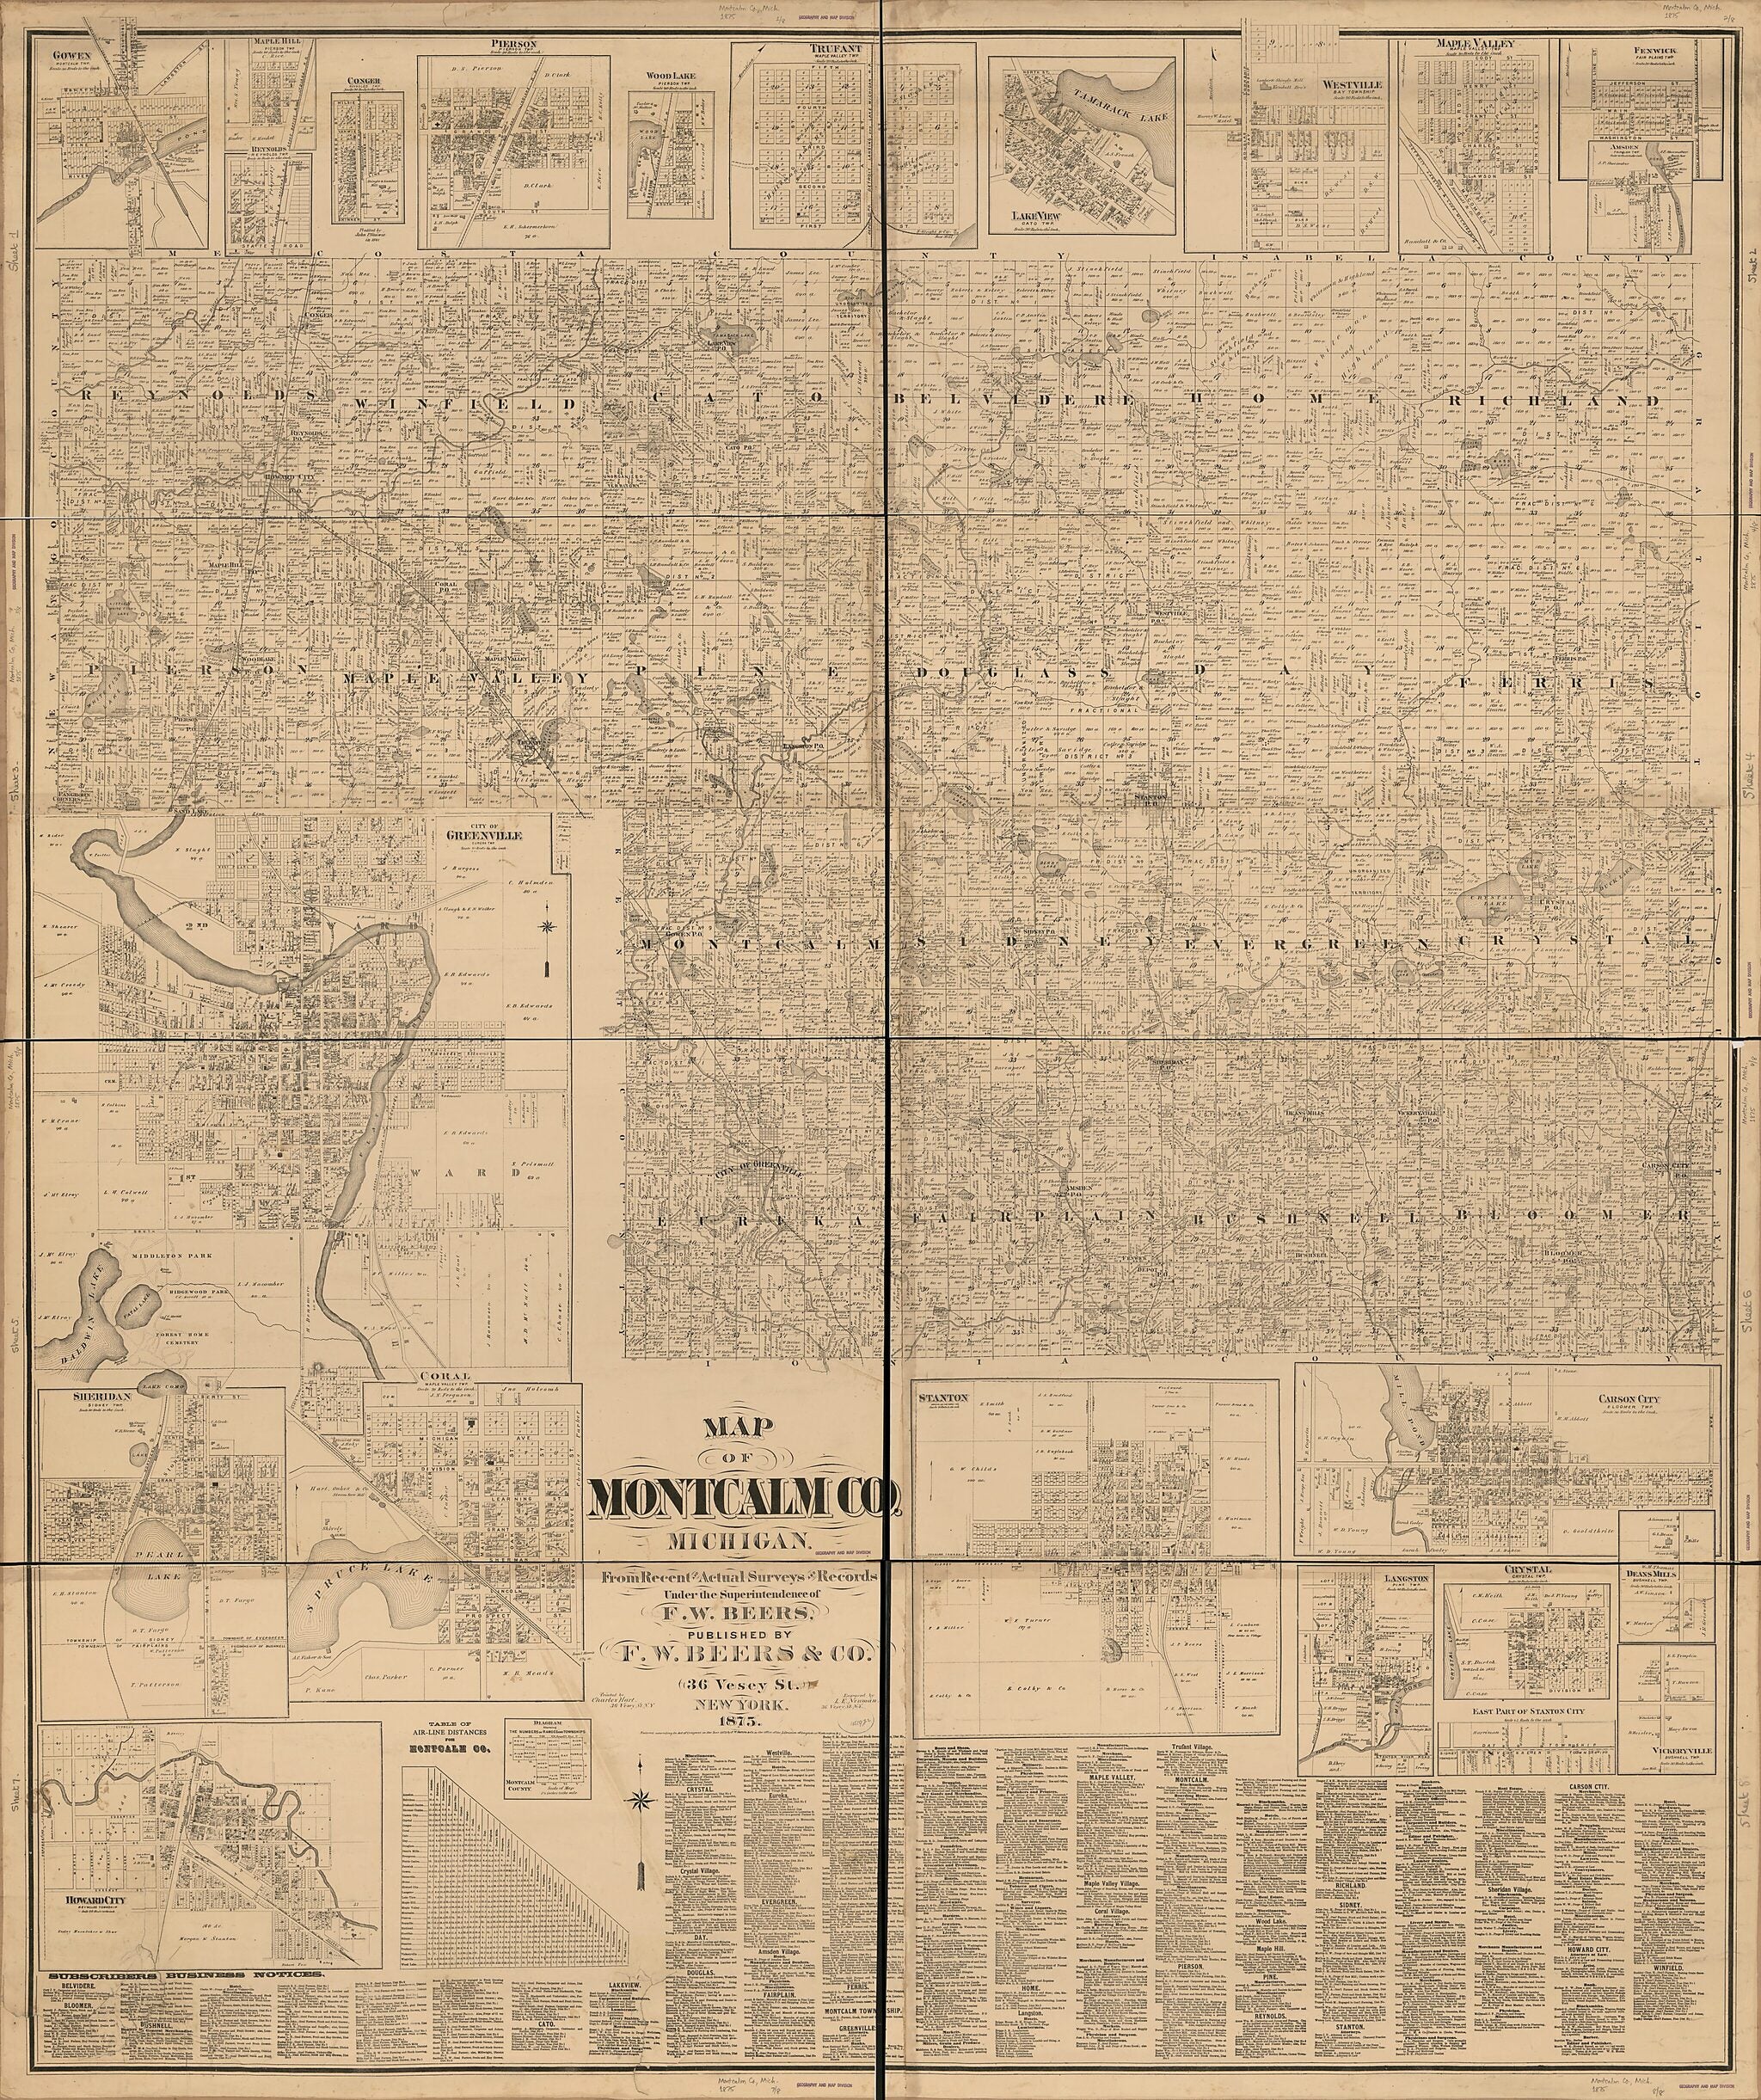 This old map of Topographic Map of Montcalm County, Michigan from 1875 was created by  F. W. Beer &amp; Co, Charles Hart, Louis E. Neumann in 1875